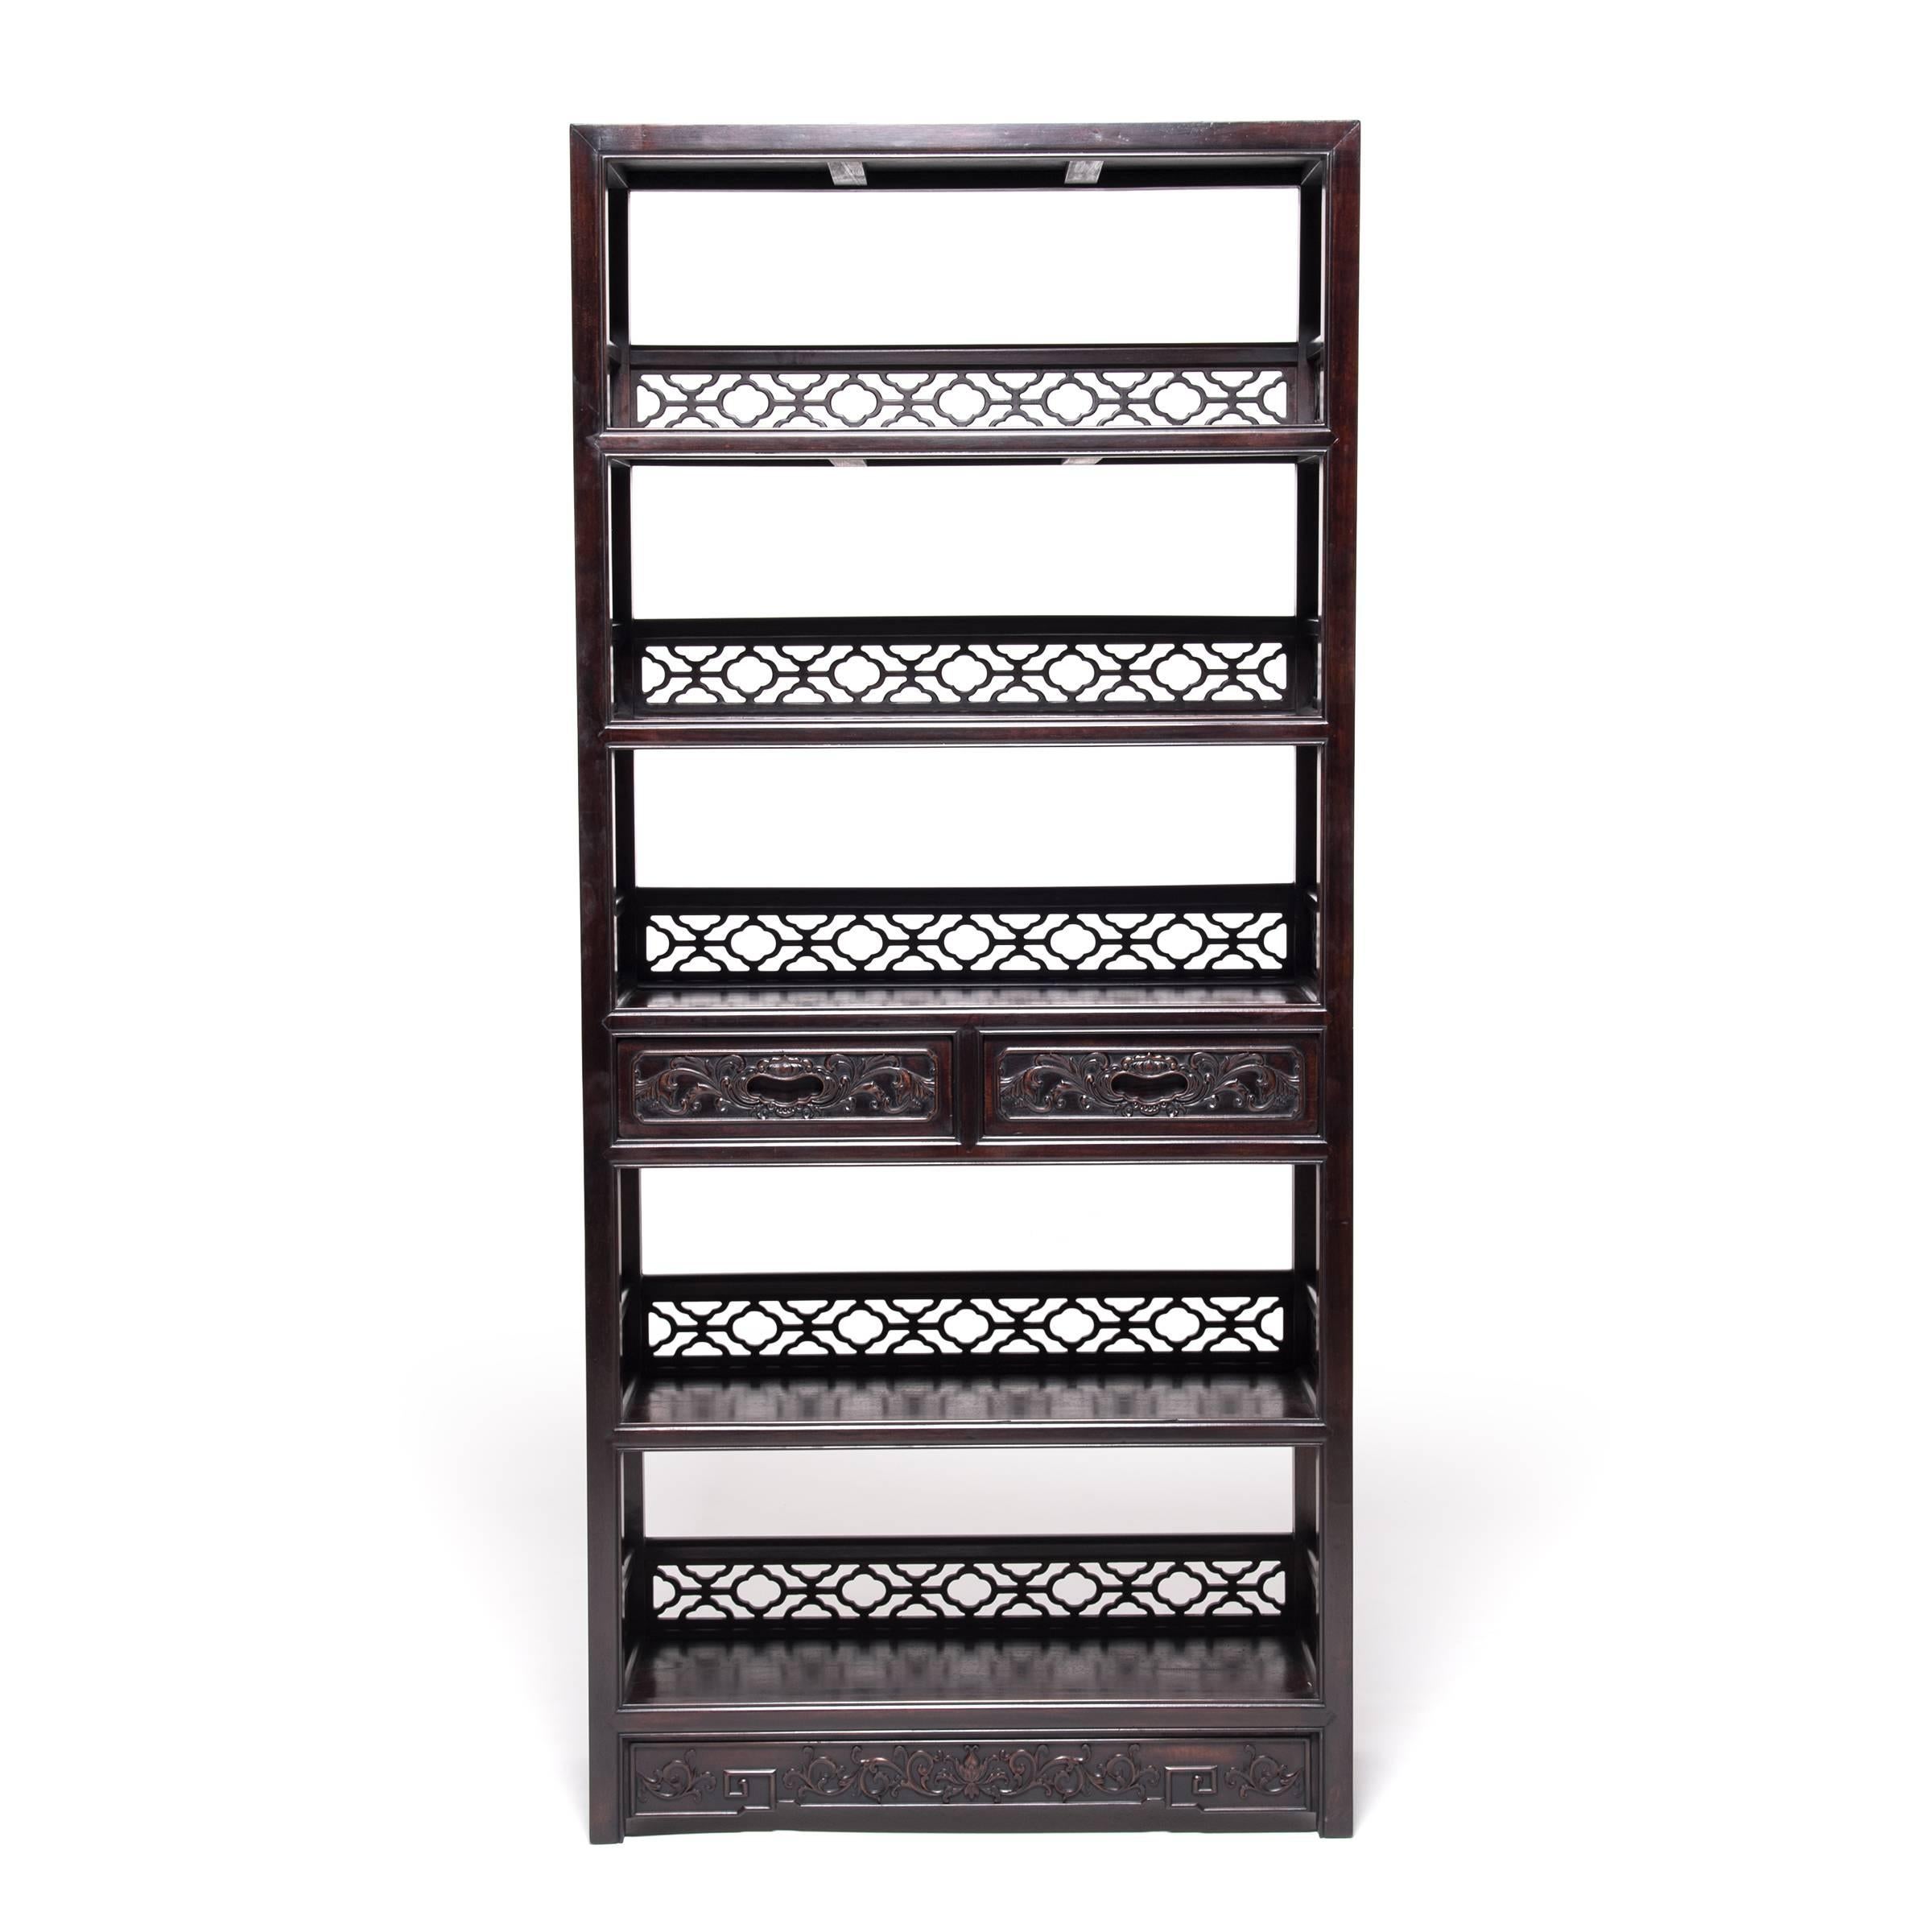 Collecting was a popular pastime for well-to-do Ming and Qing dynasty gentleman and shelves like these would have been ideal places to display jades, curios, collectibles and important texts. Each shelf is backed with lattice, brilliantly joined